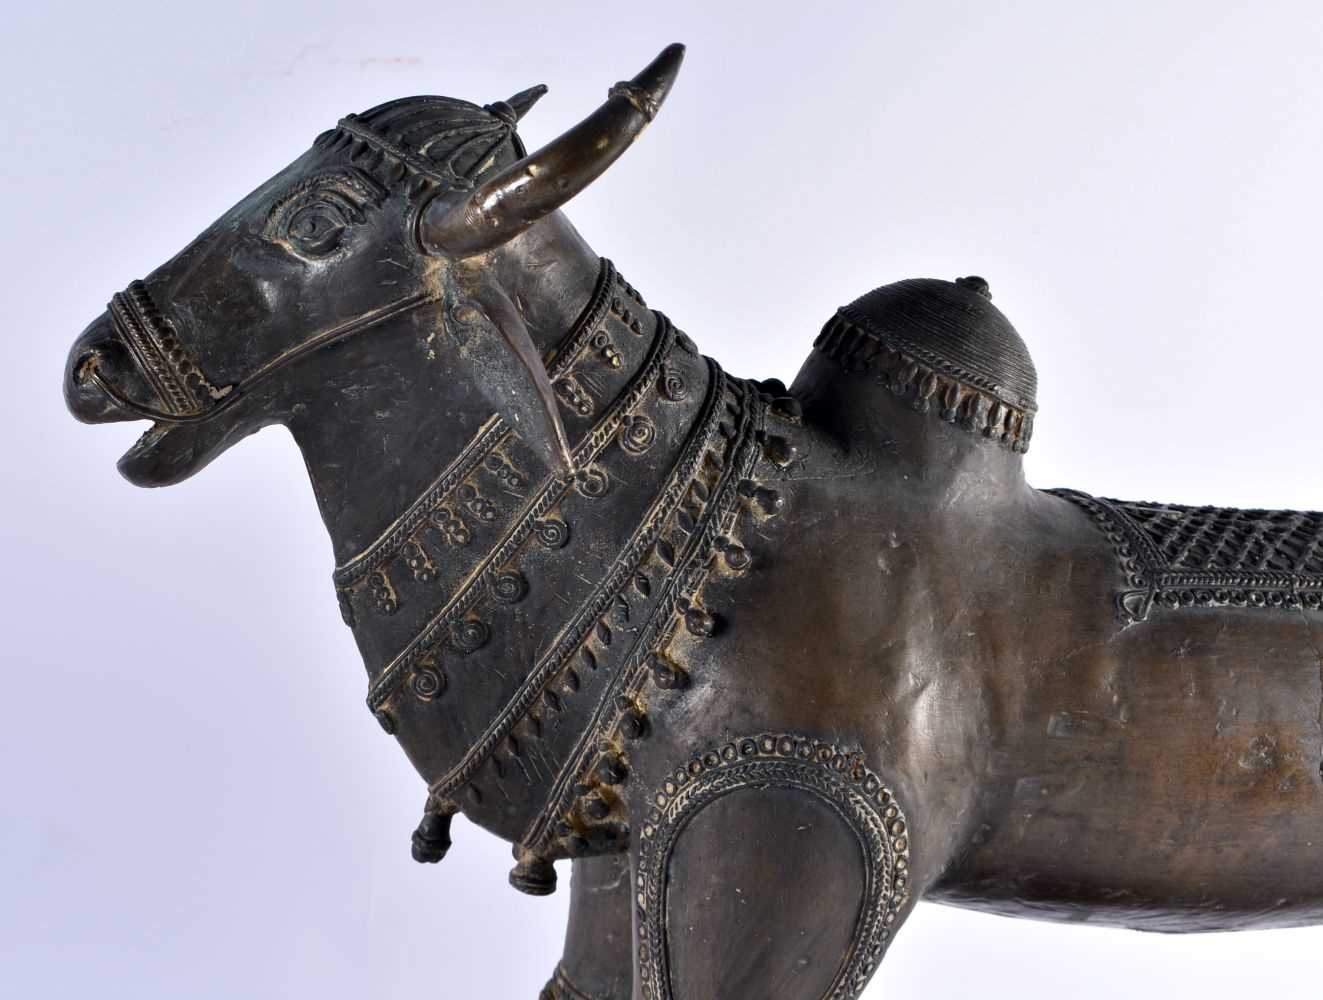 A LARGE DHOKRA BRONZE SCULPTURE OF A HOLY COW. Orissa (Odisha), Eastern India, 18th - 19th - Image 2 of 4